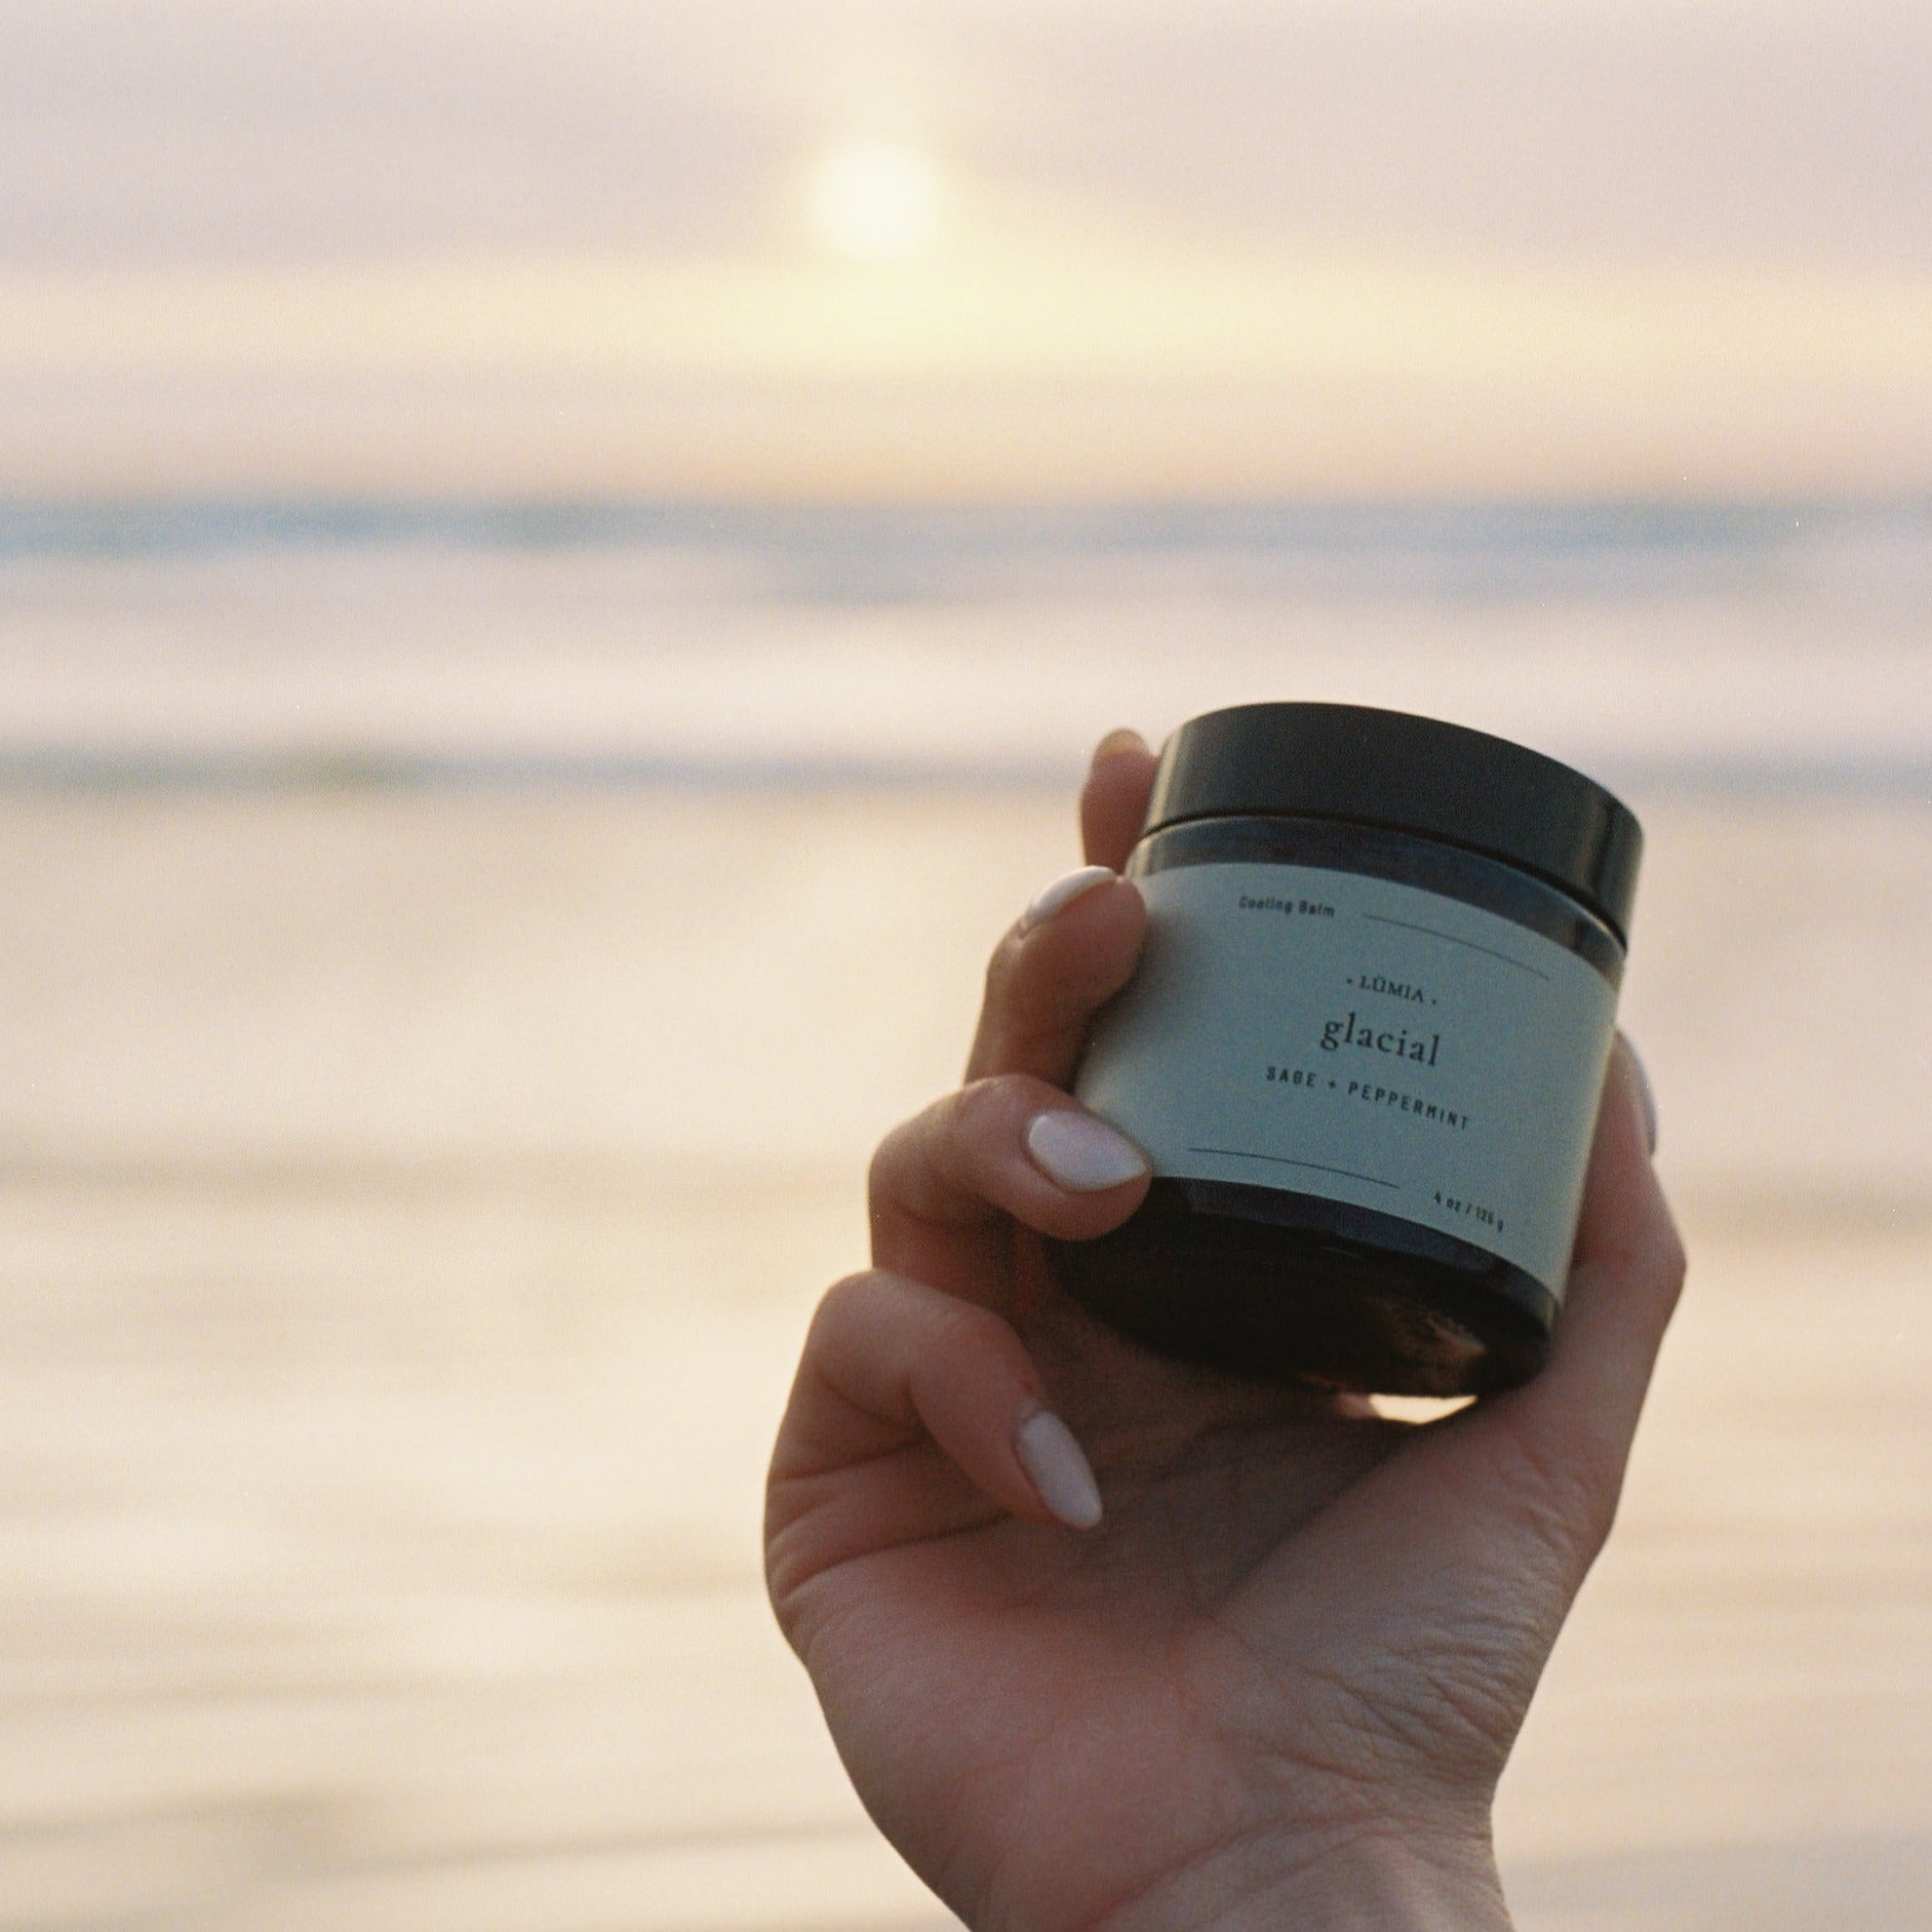 Waterless Skincare, Glacial Cooling Balm held out over ocean sunset